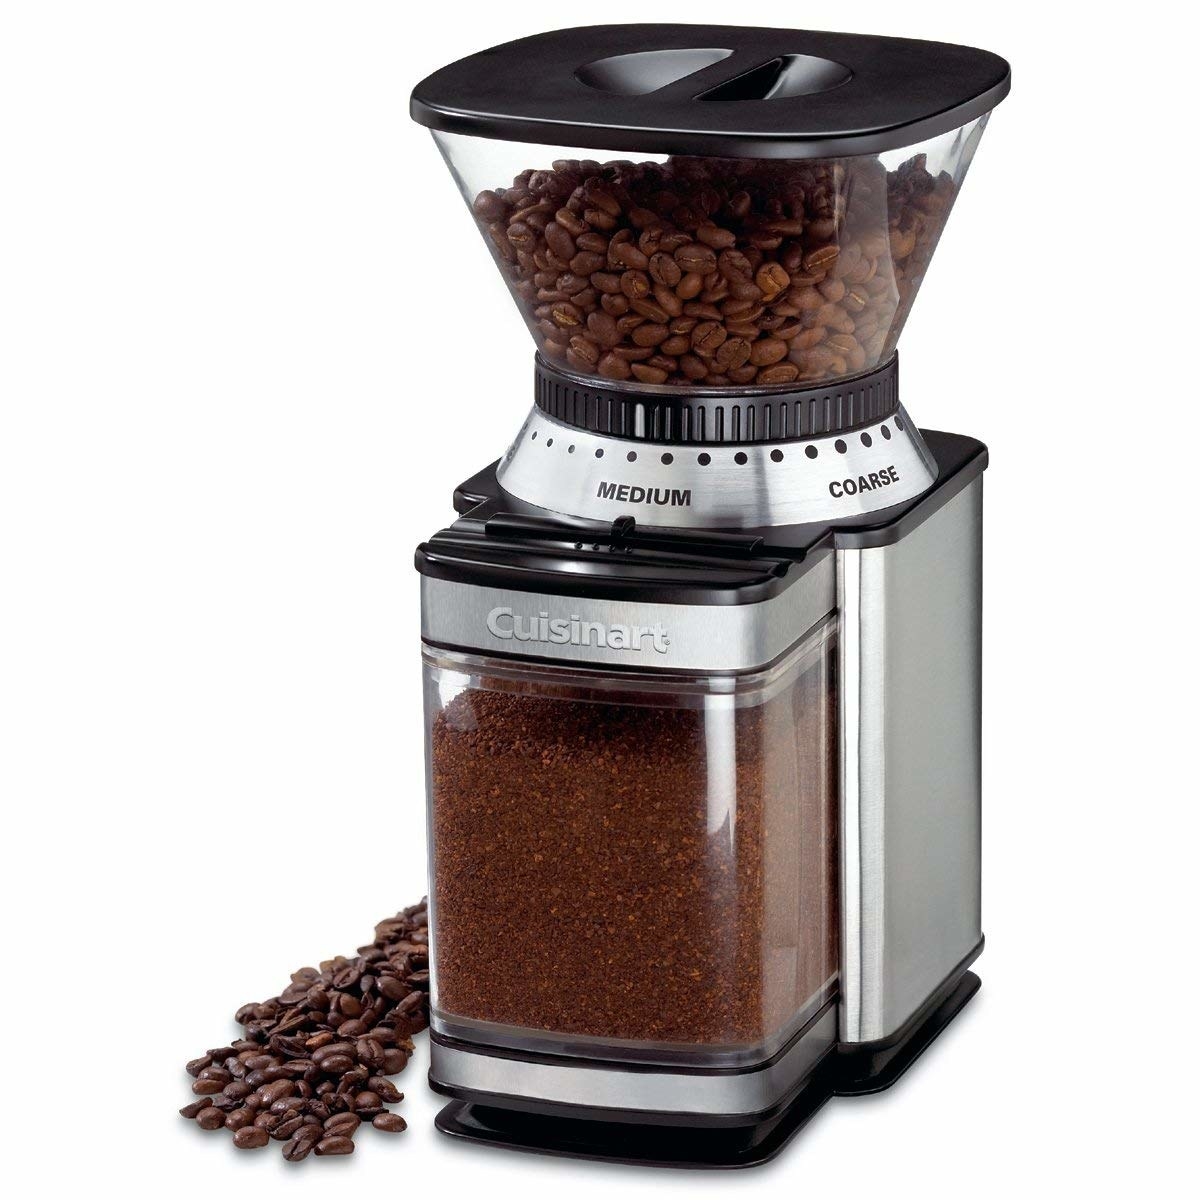 the coffee grinder with ground beans in bottom compartment and whole beans in top comaprtment